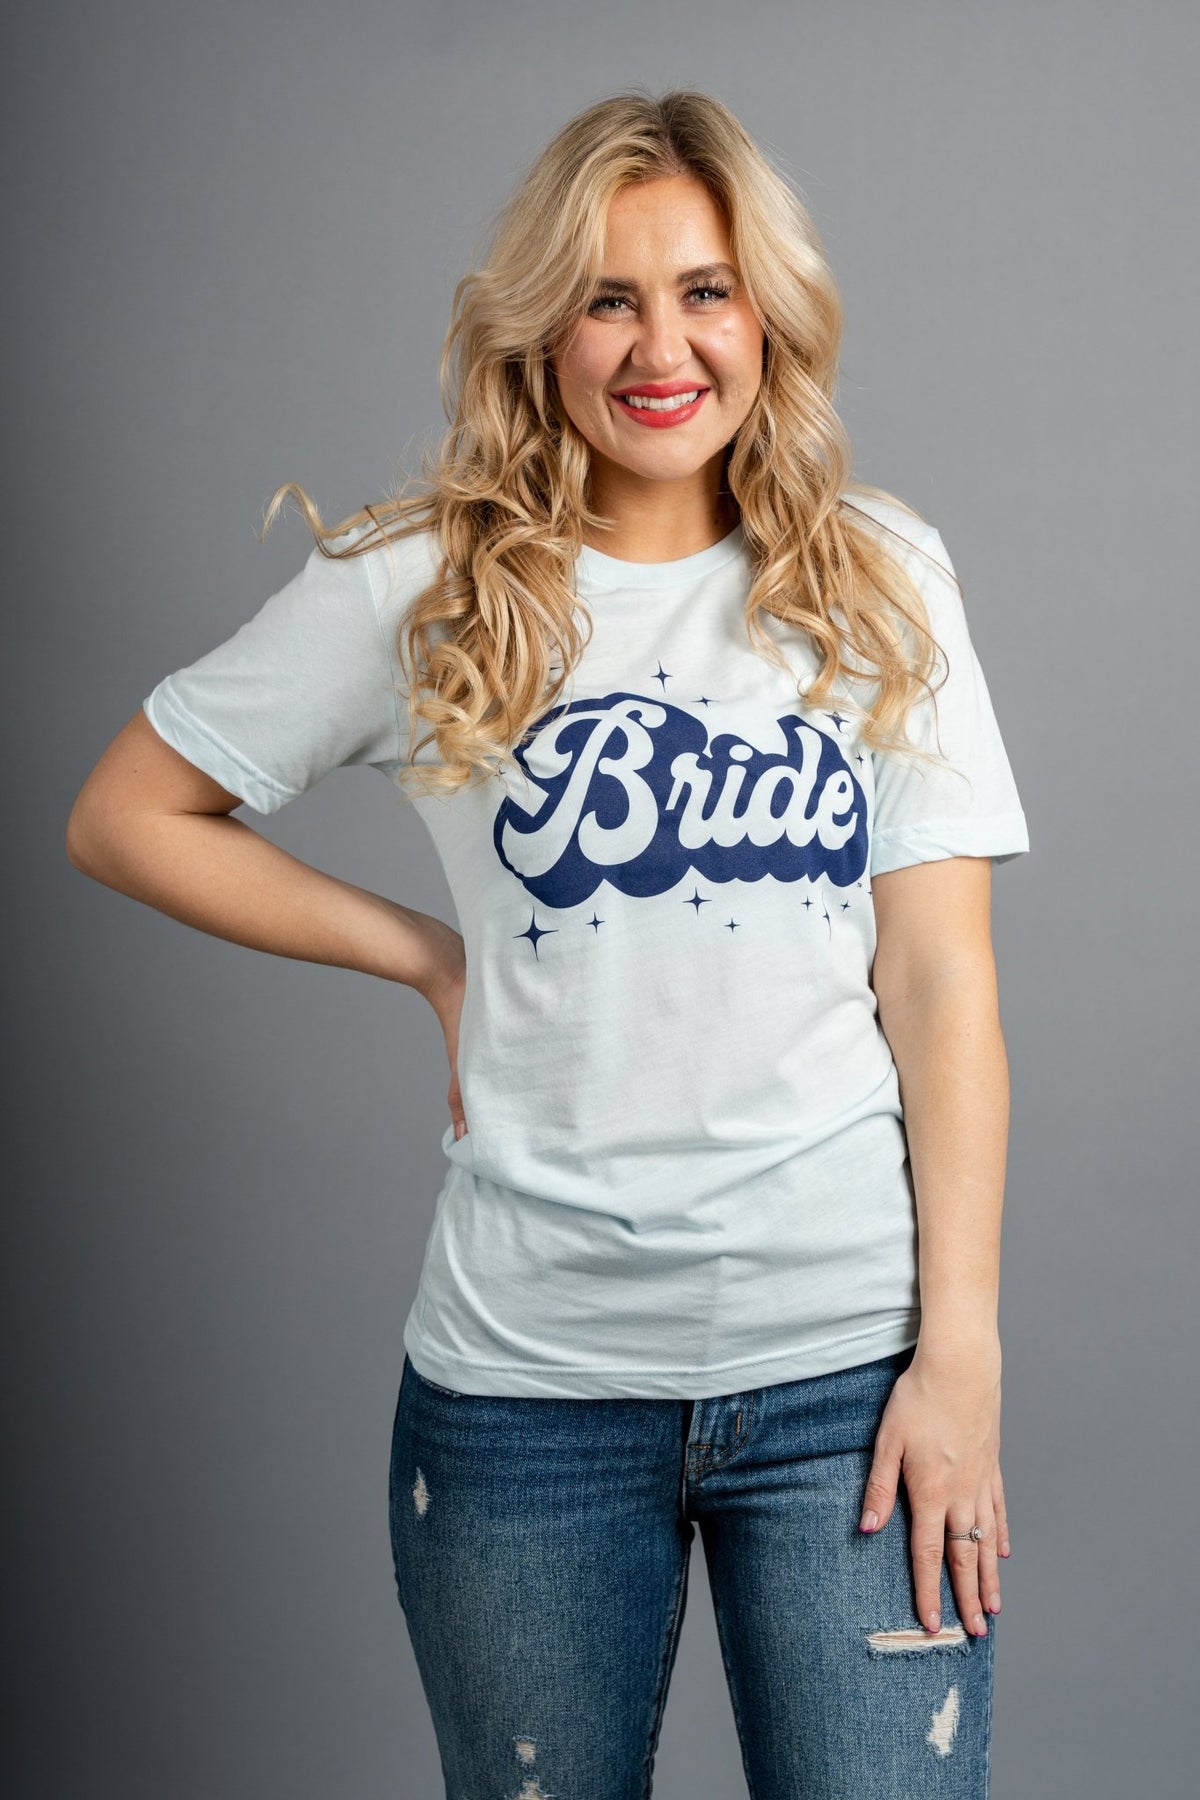 Bride retro short sleeve t-shirt ice blue - Stylish t-shirt - Trendy Graphic T-Shirts and Tank Tops at Lush Fashion Lounge Boutique in Oklahoma City